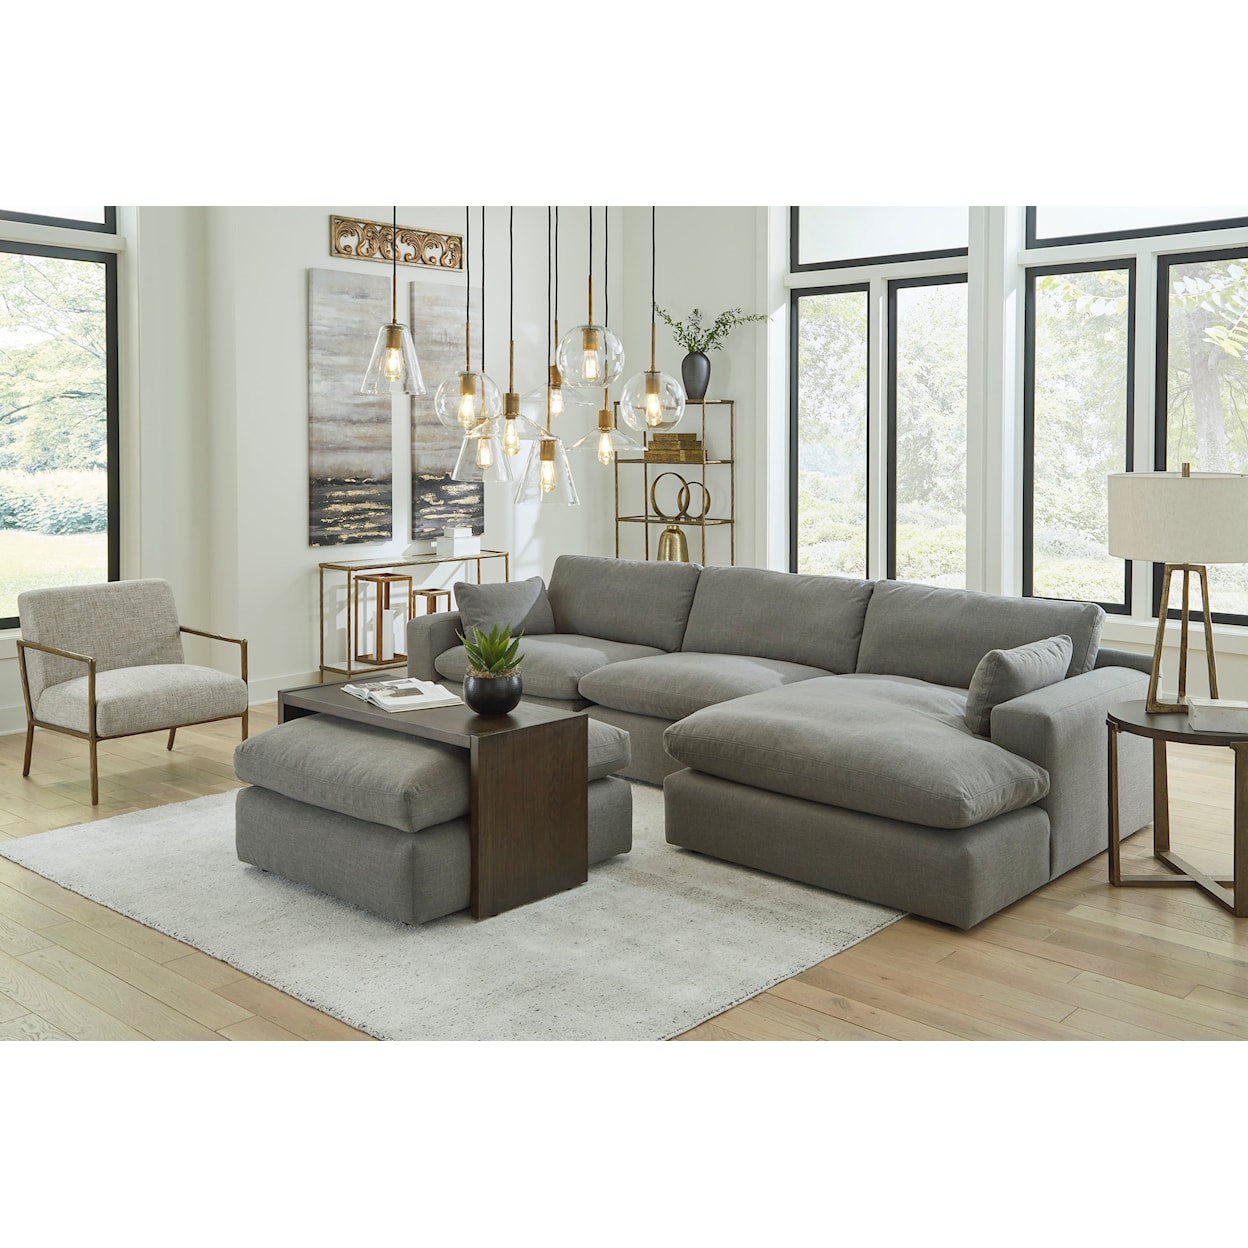 Benchcraft Elyza 3-Piece Modular Sectional with Chaise